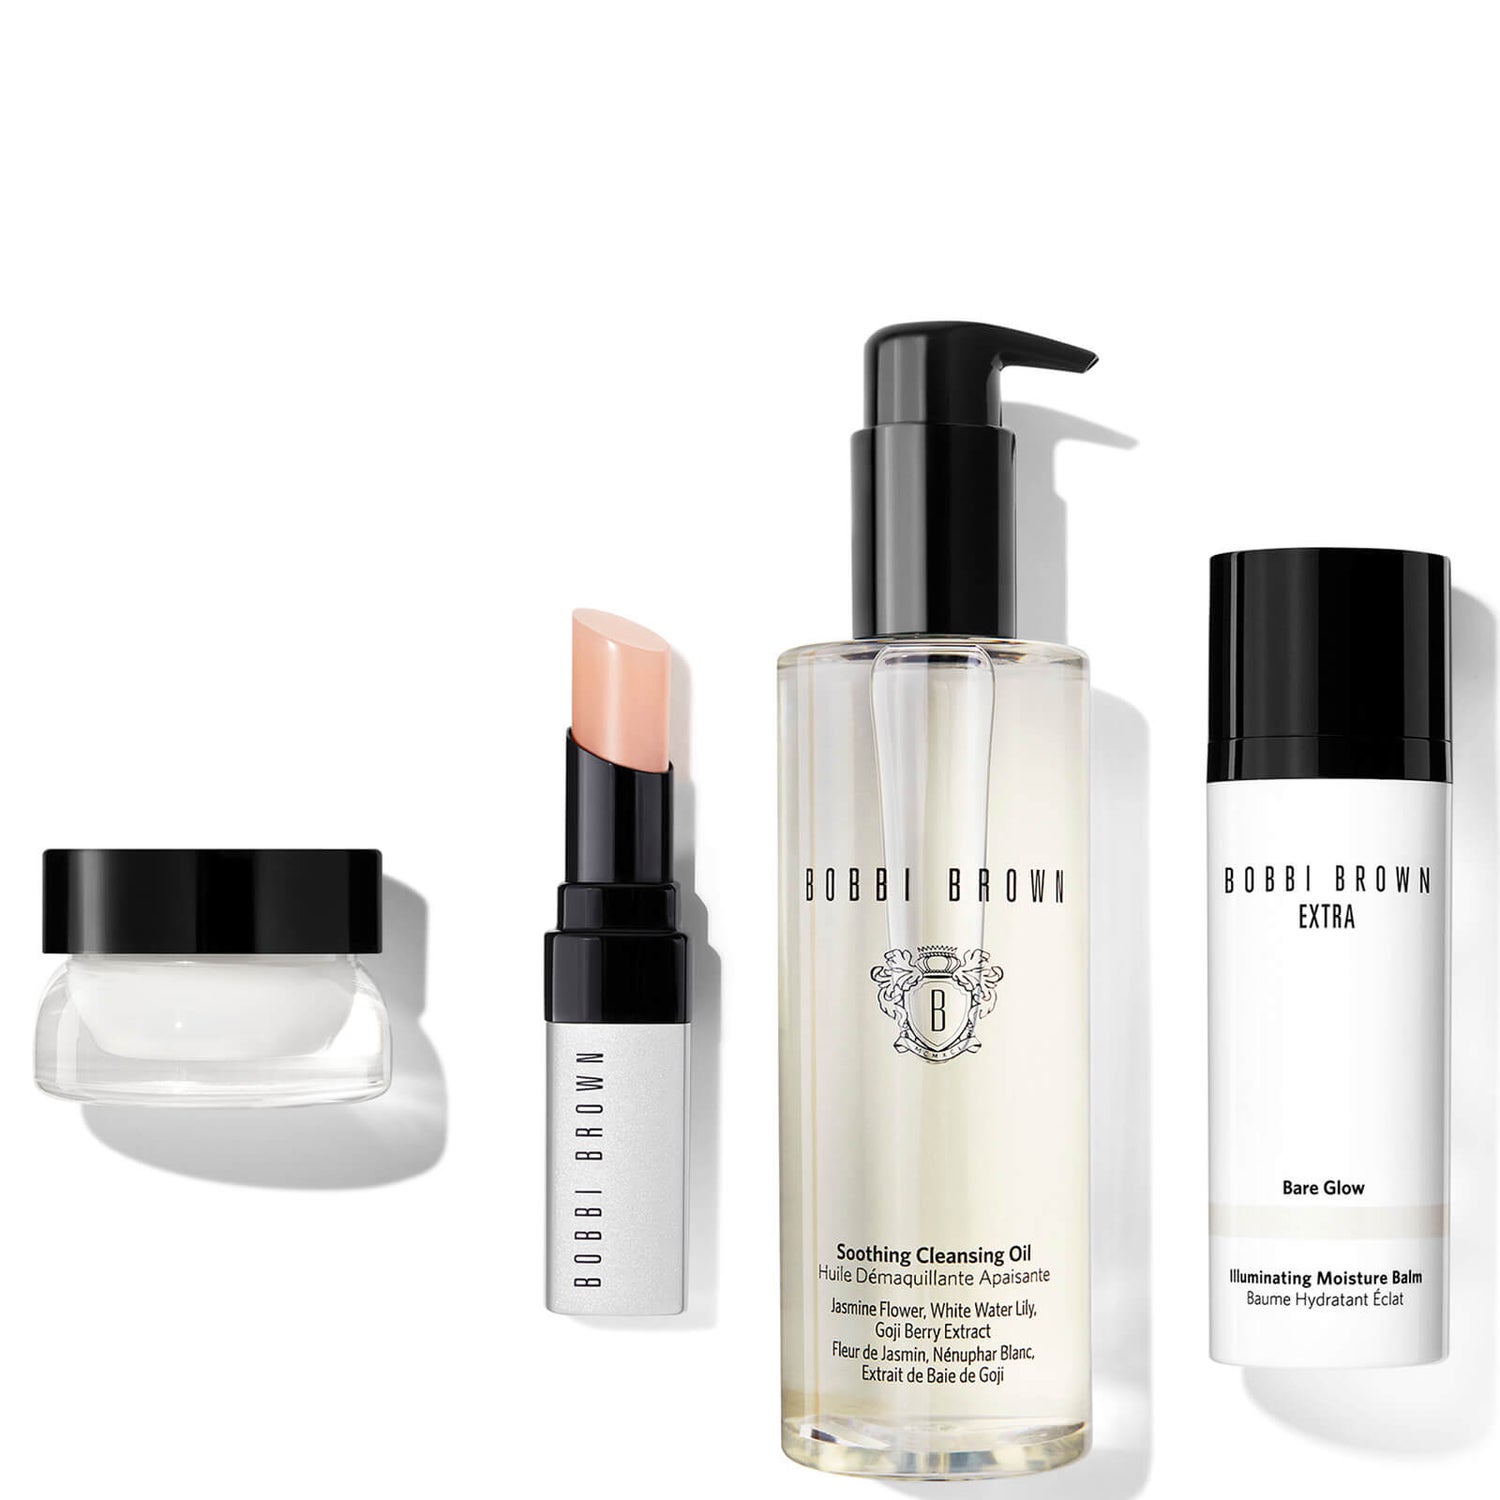 Bobbi Brown Cleanse and Care Extra Skincare Set